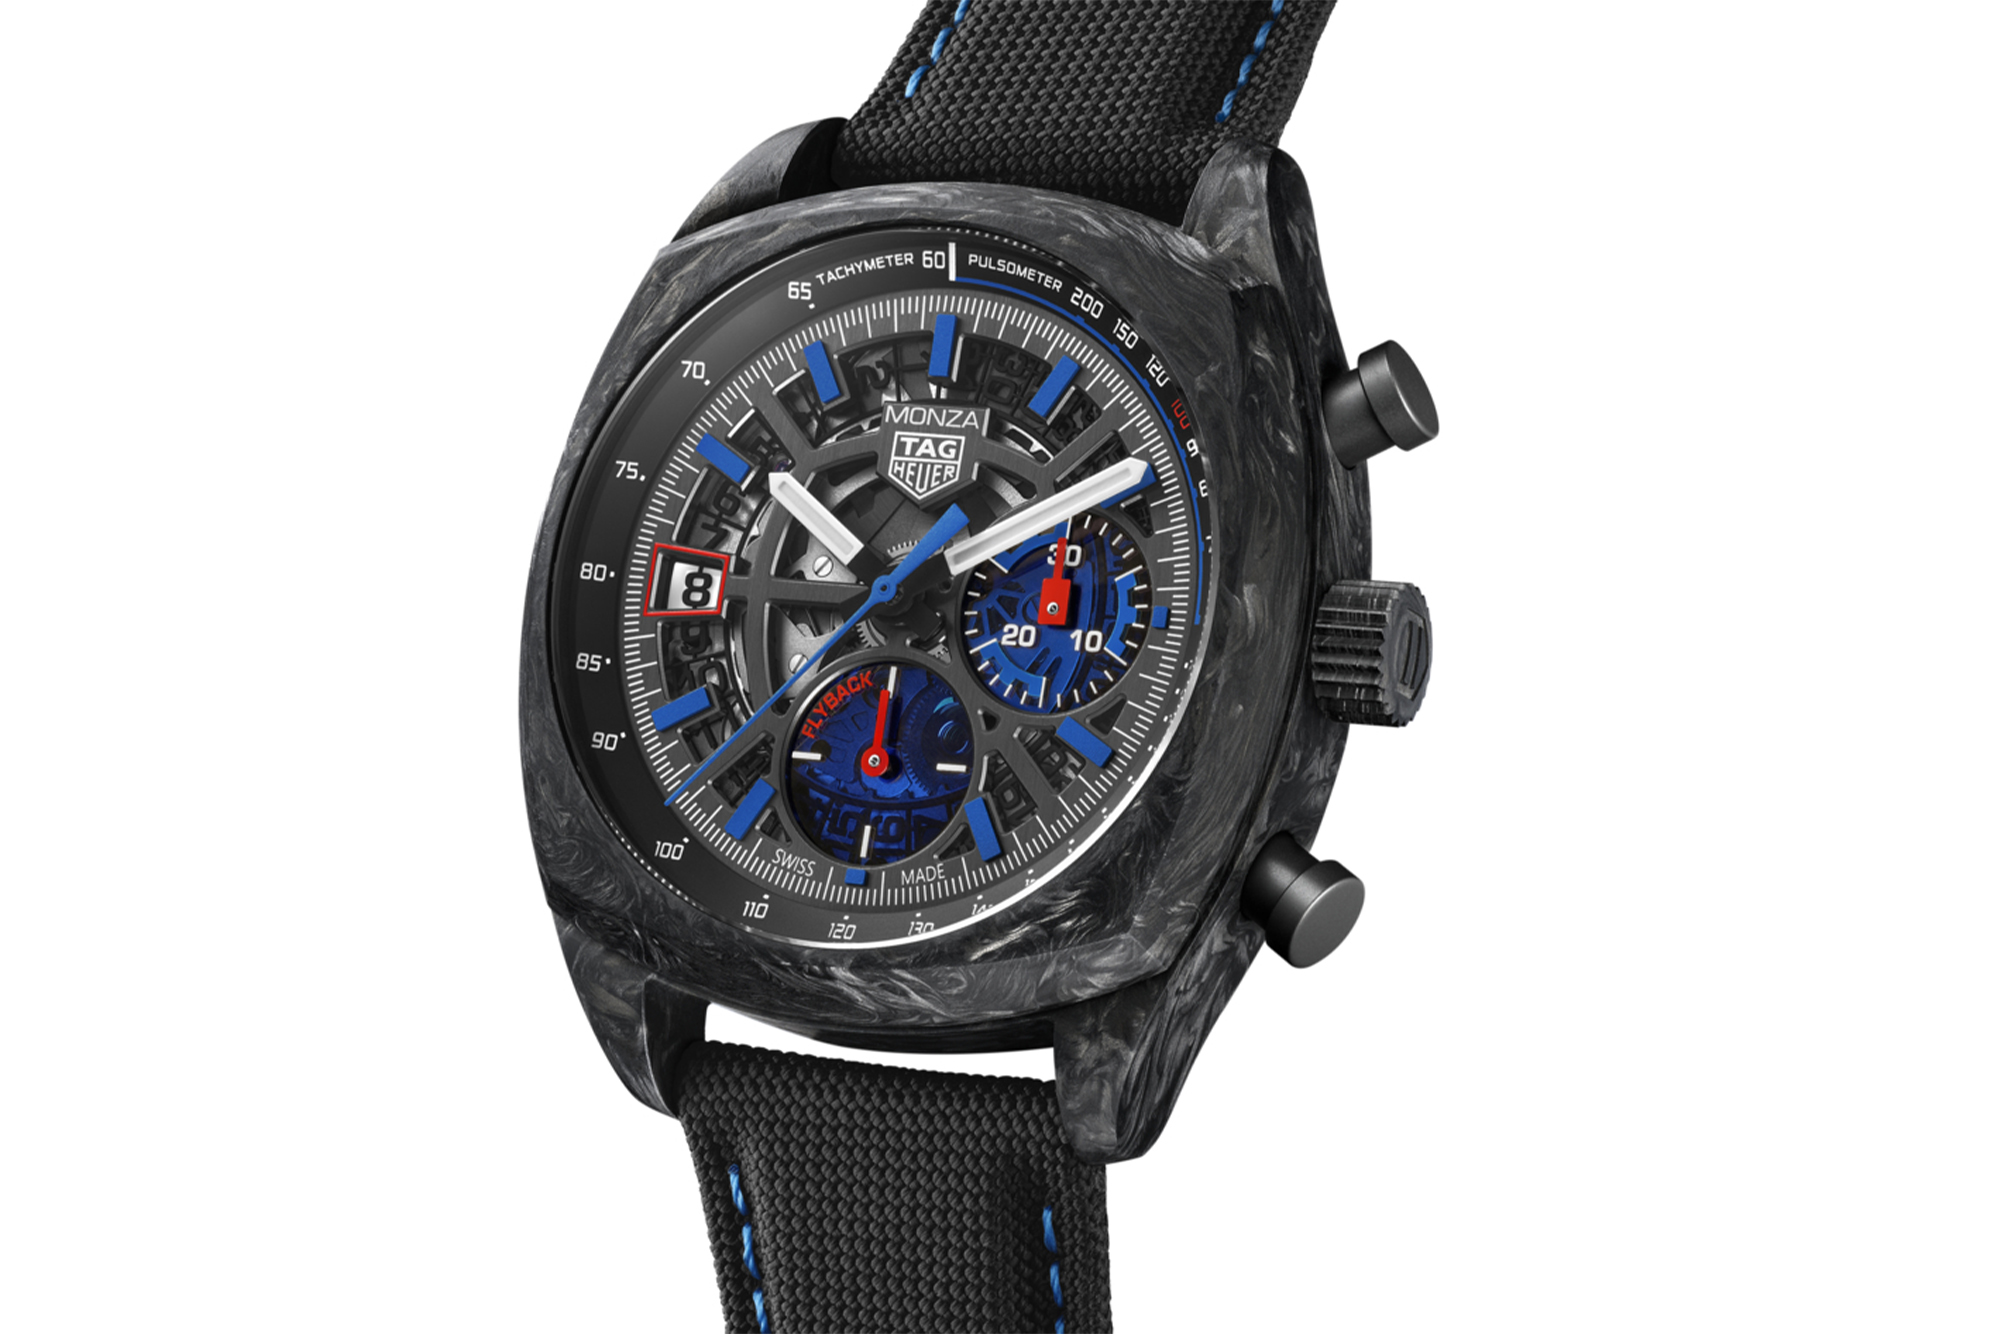 Tag Heuer Racing watch front